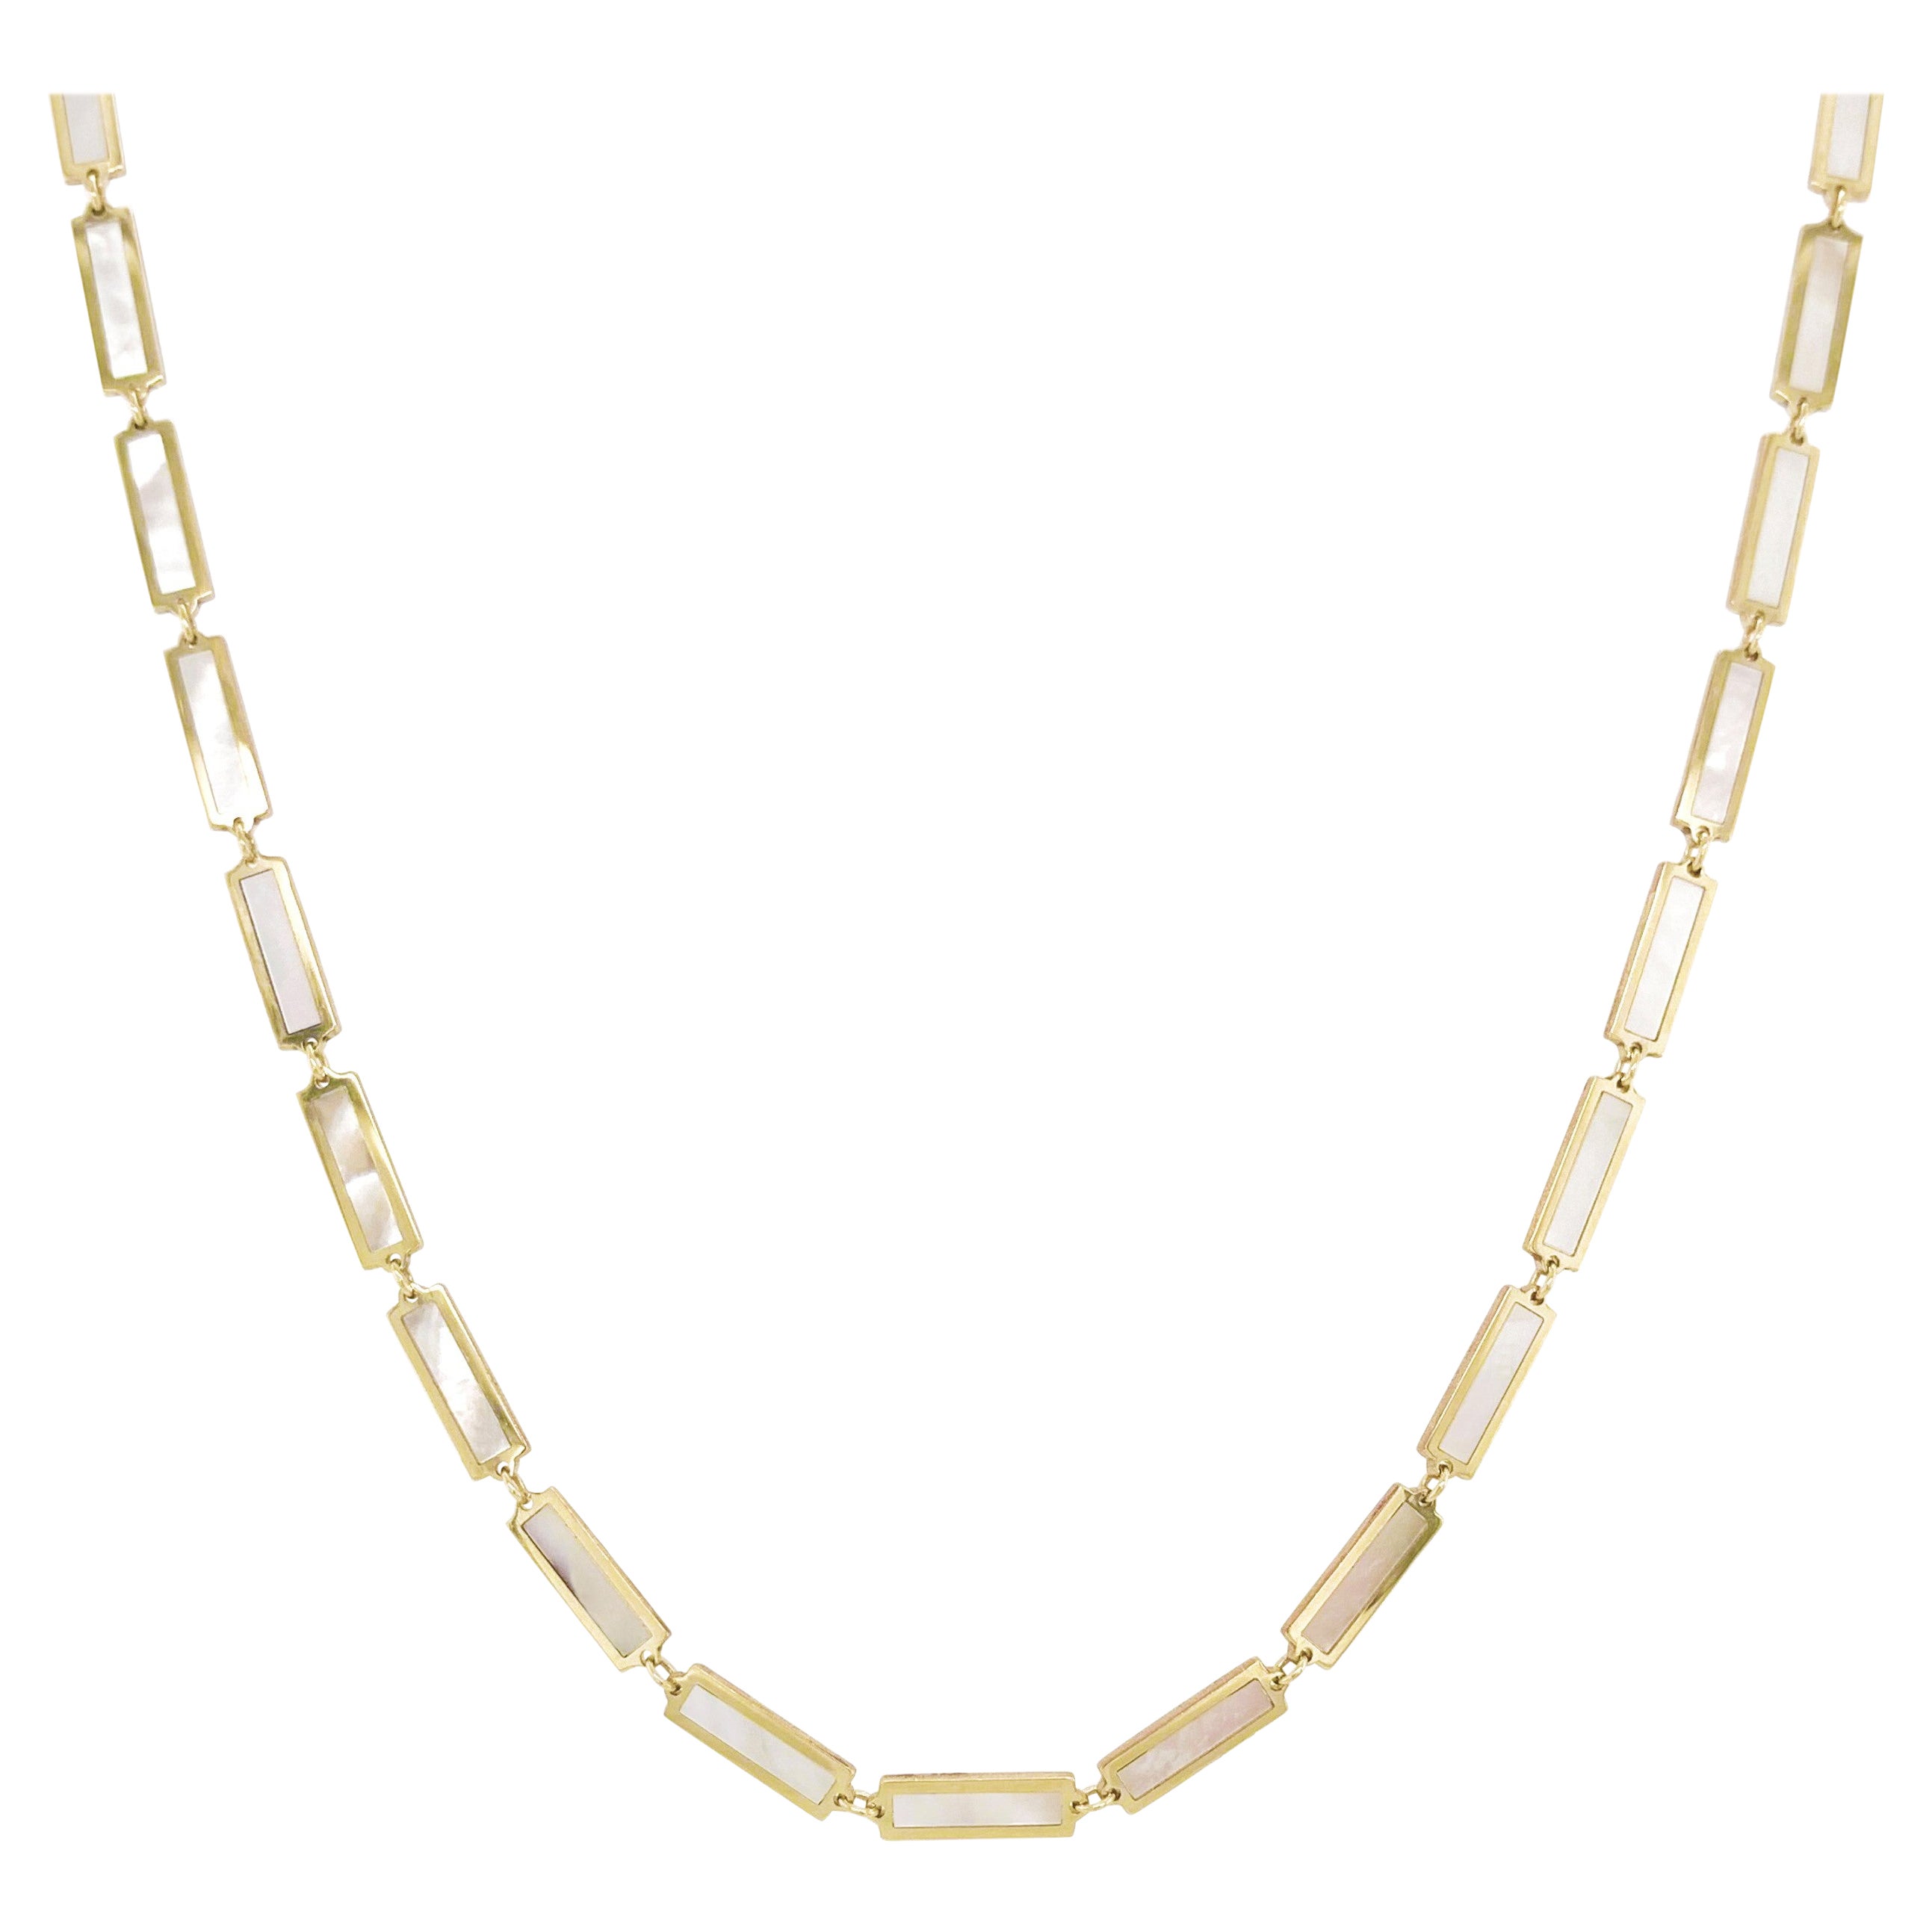 14k Yellow Gold & Mother of Pearl Station Bar Necklace